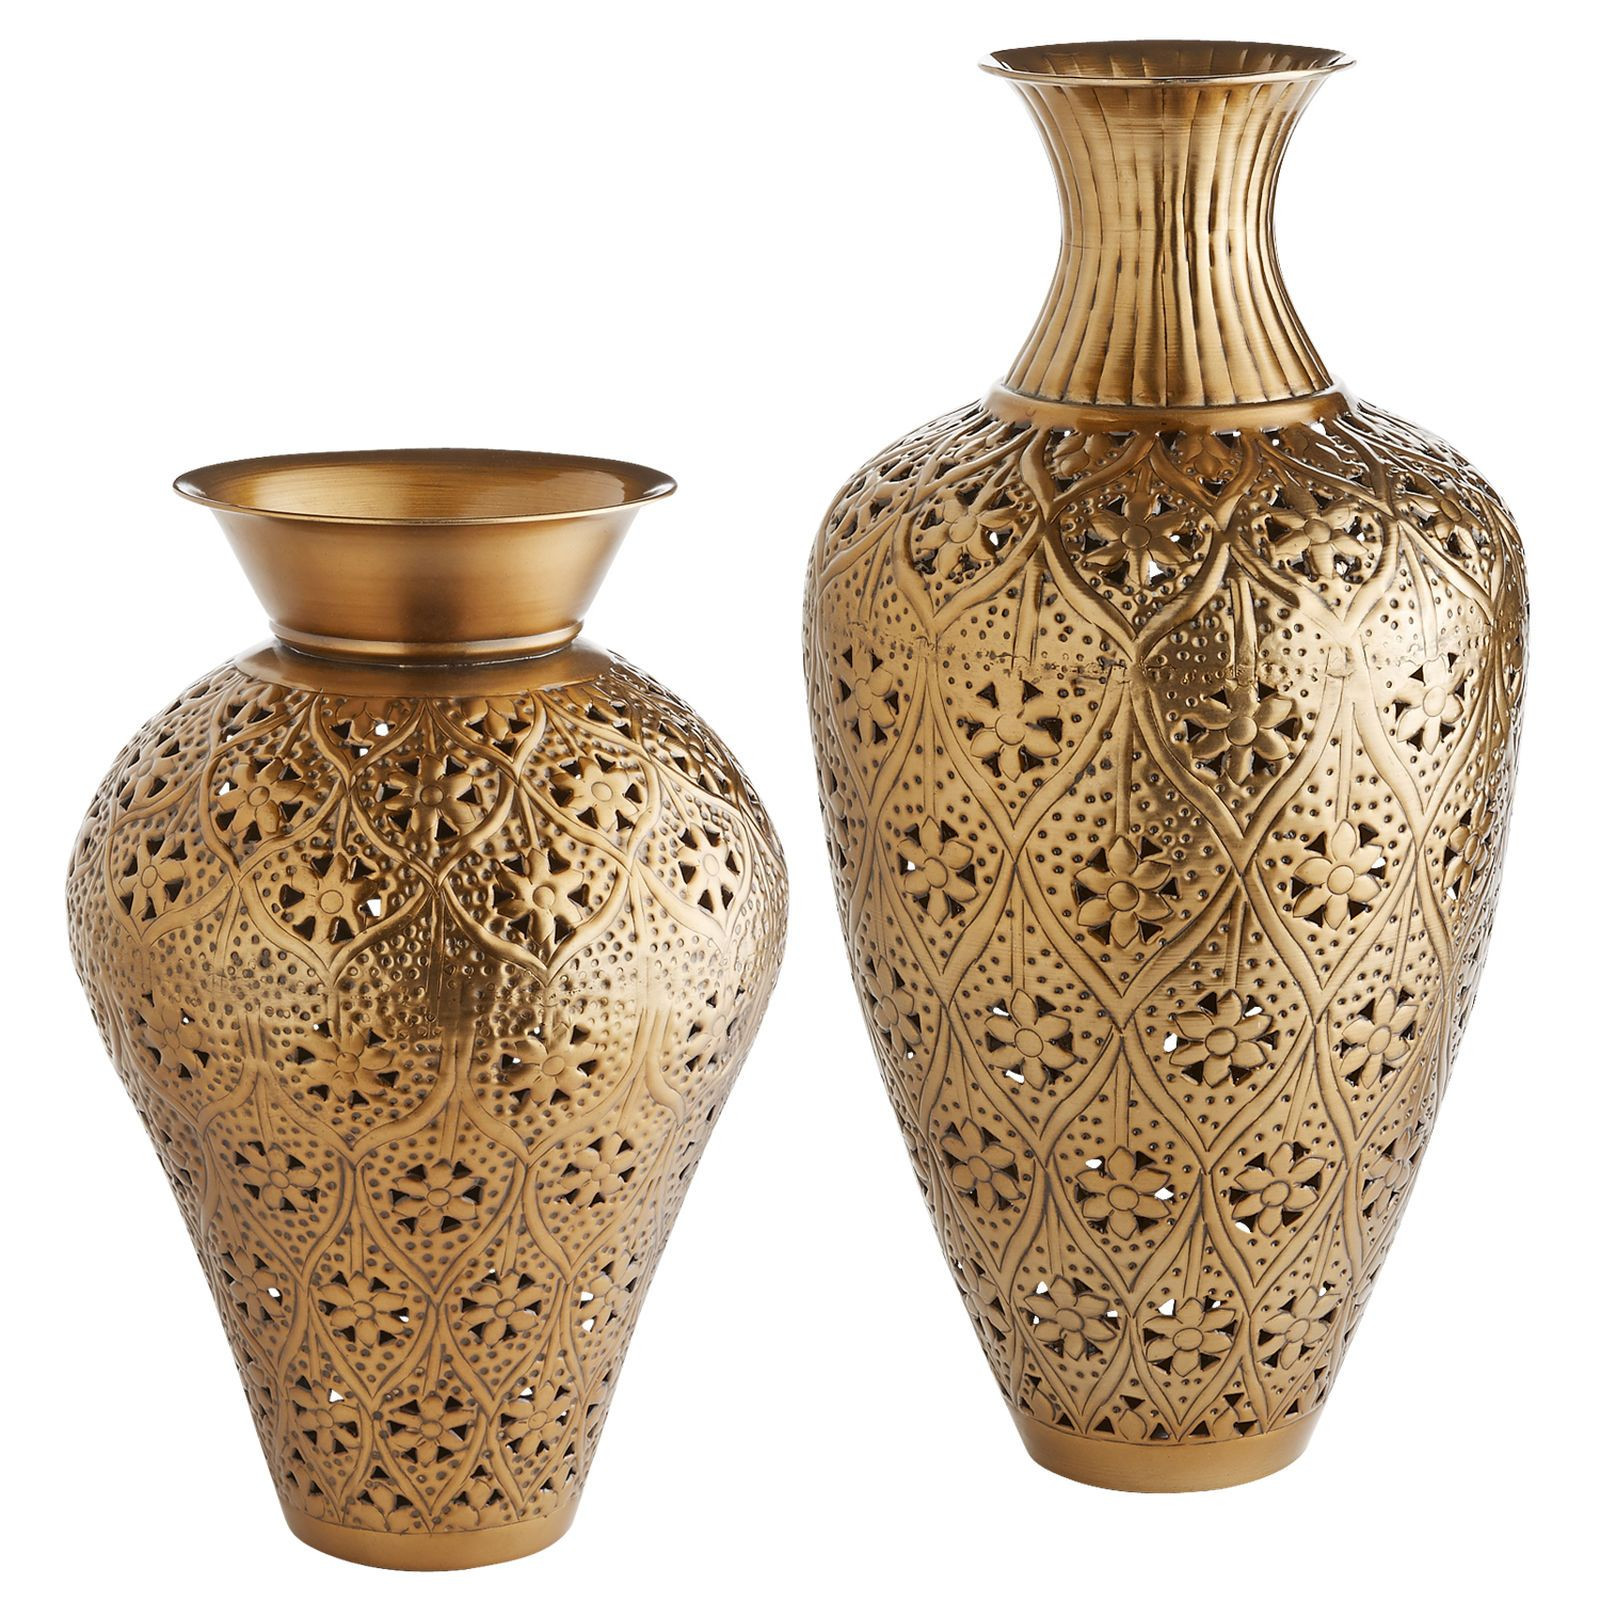 20 Great Big oriental Vases 2024 free download big oriental vases of found the perfect additions to your diverse collection our for found the perfect additions to your diverse collection our unconventional vases evoke that bohemian